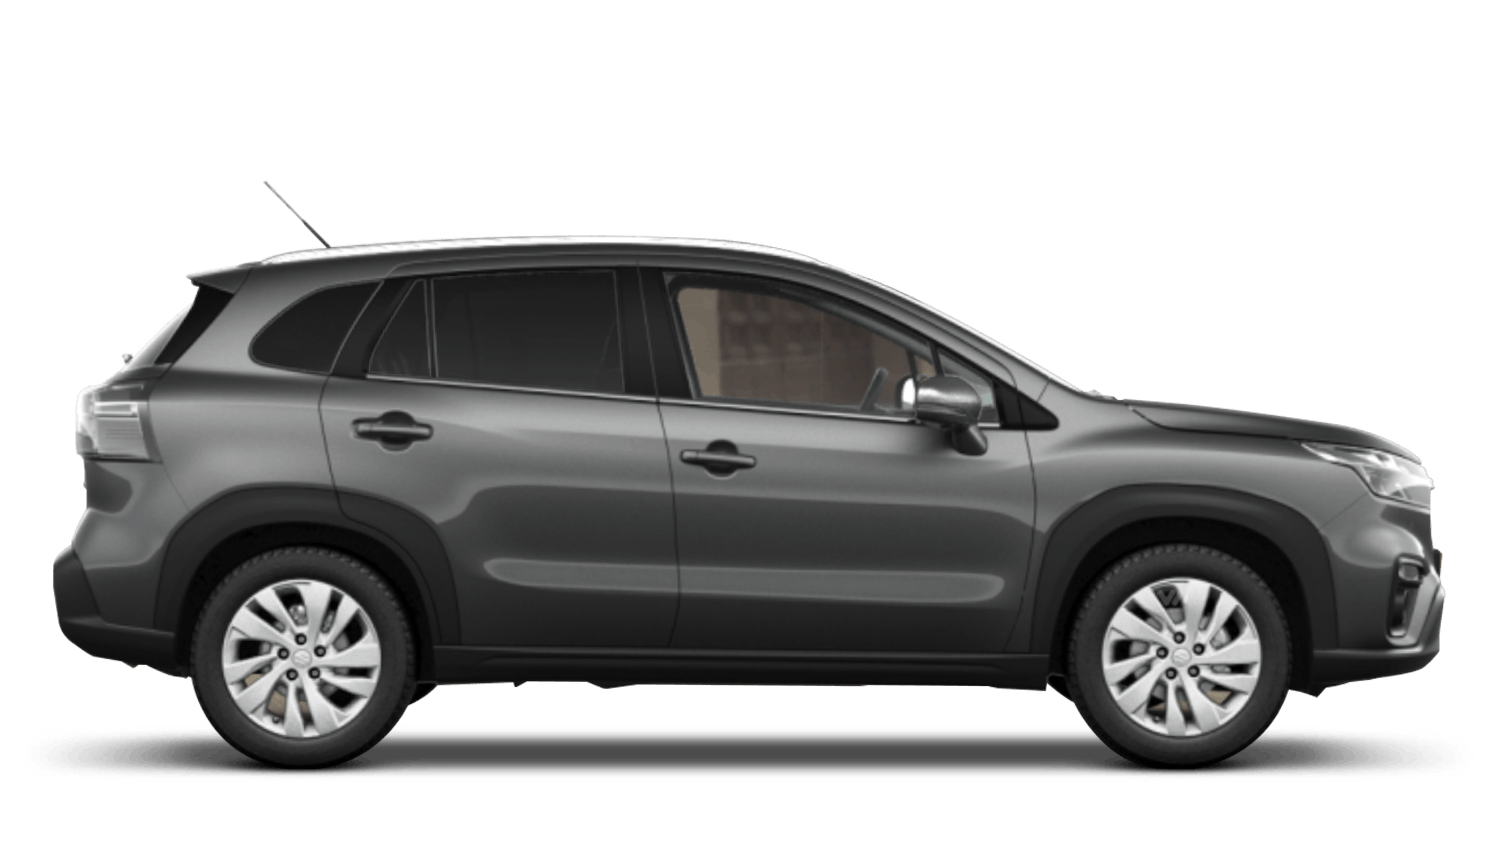 New S-Cross our latest SUV. On sale now.